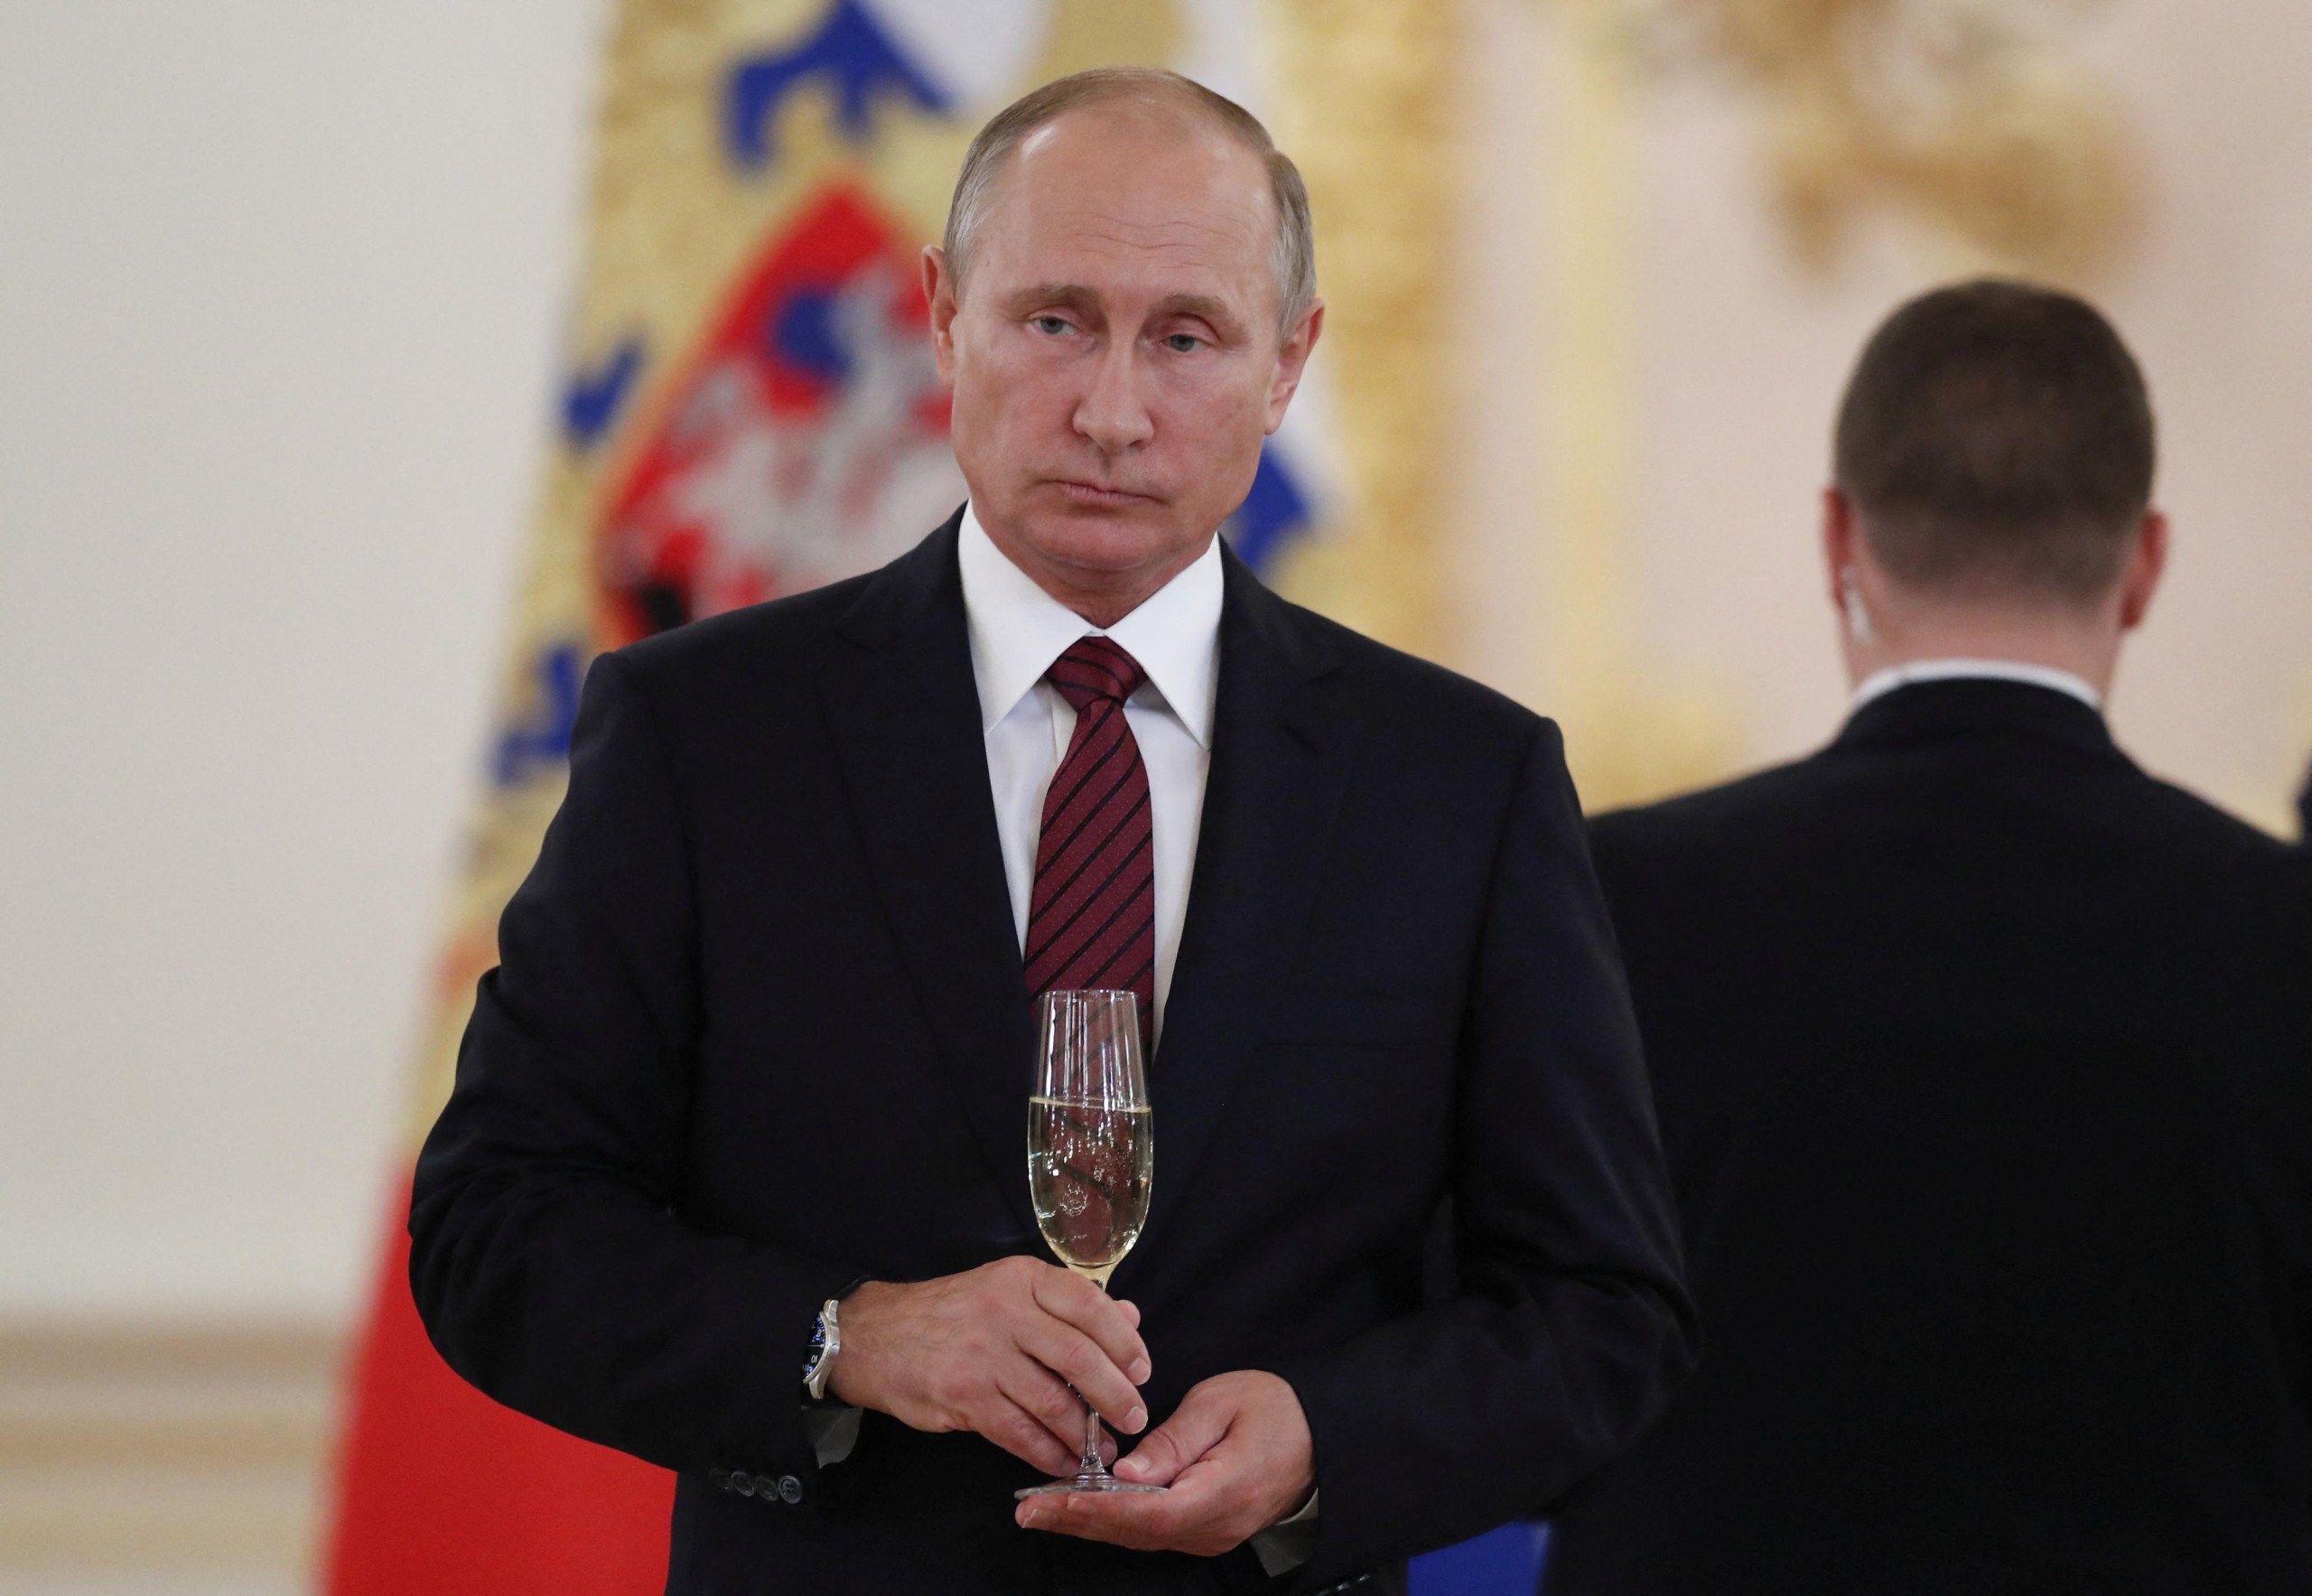 FILE PHOTO: Russian President Vladimir Putin holds a glass of champagne during a ceremony to receive credentials from foreign ambassadors at the Kremlin in Moscow, Russia October 3, 2017. REUTERS/Pavel Golovkin/Pool/File Photo Photo: POOL/REUTERS